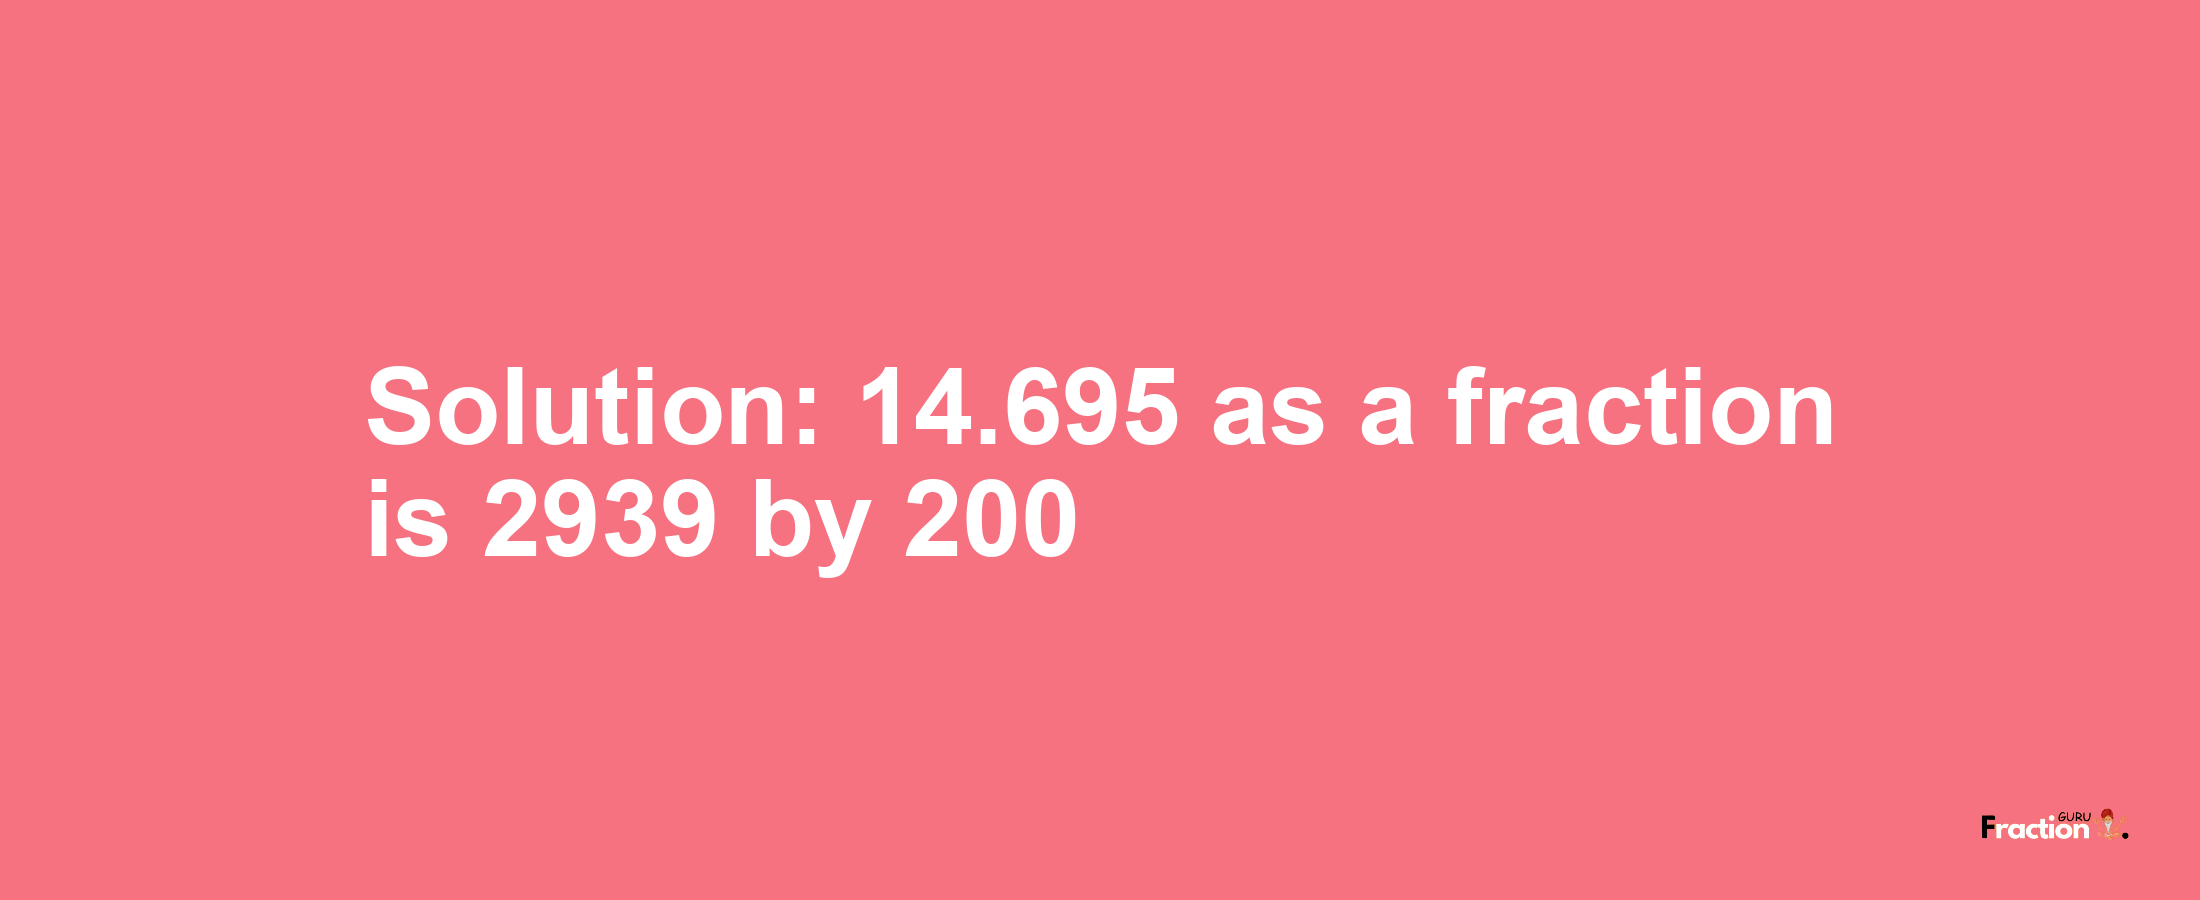 Solution:14.695 as a fraction is 2939/200